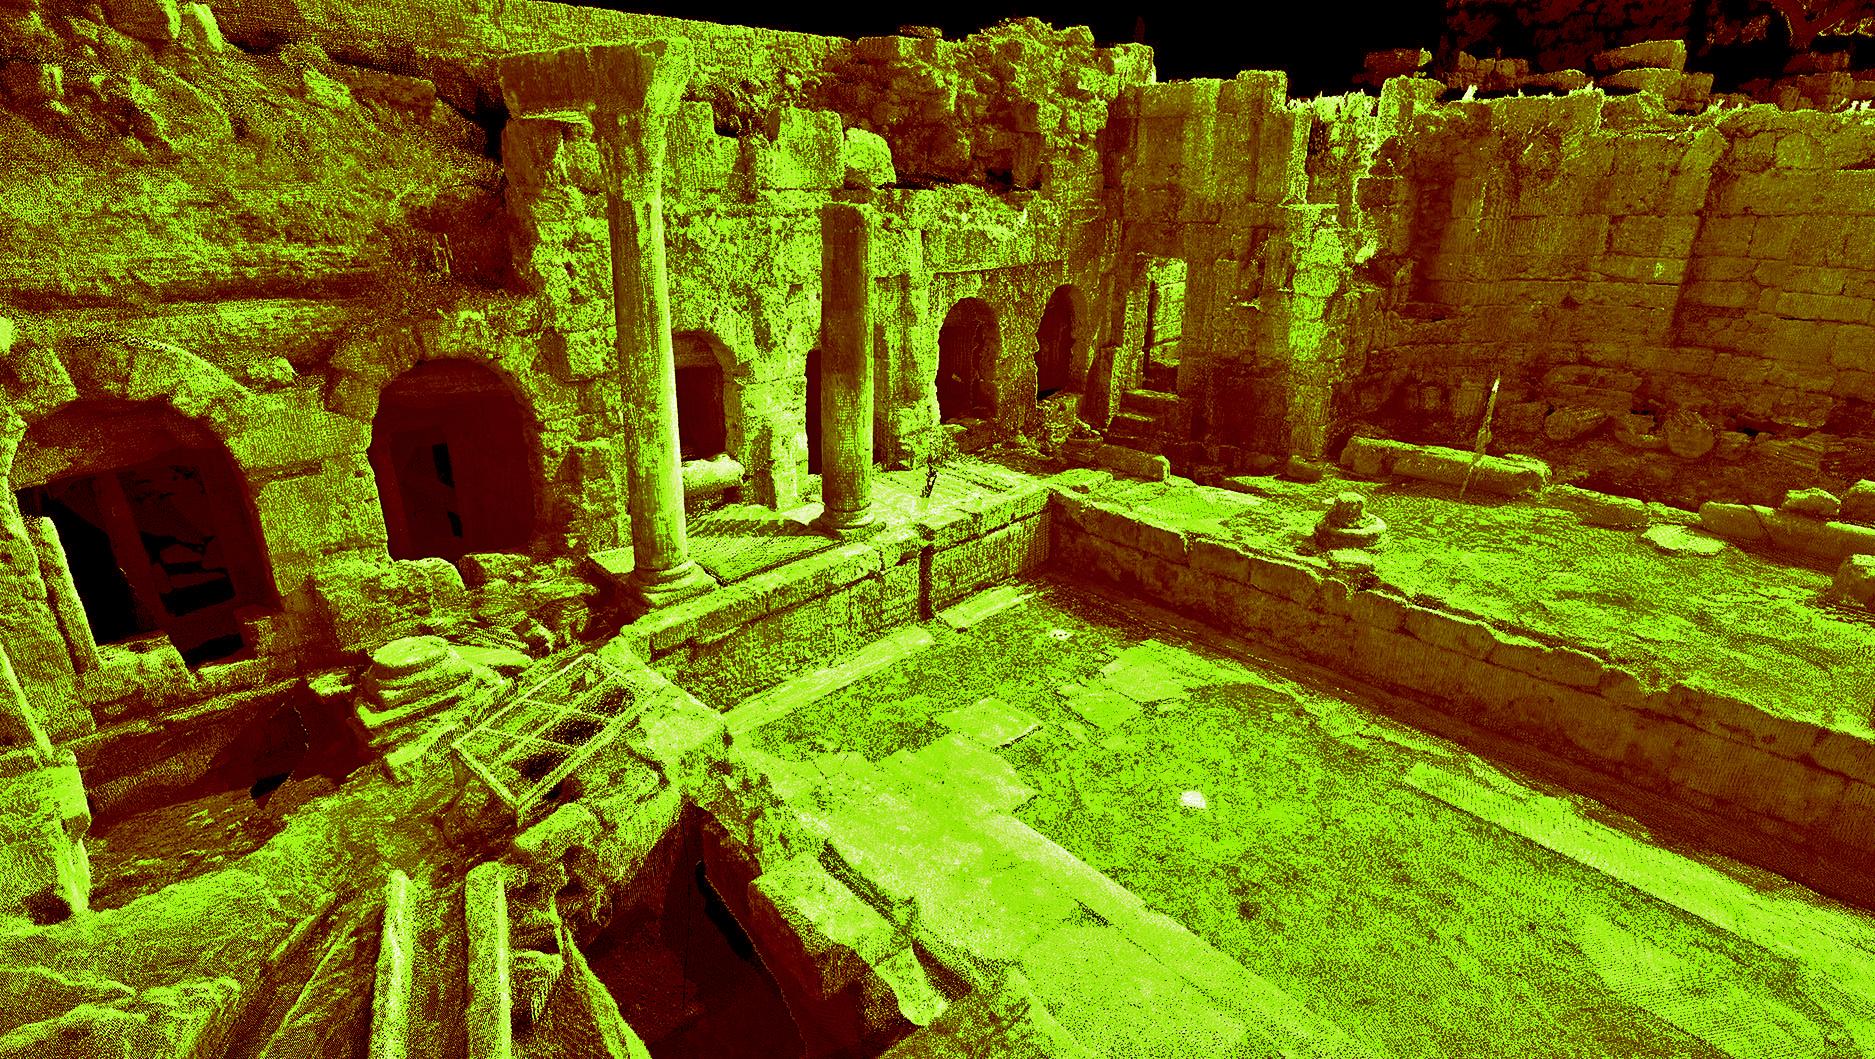 Laser scan data of the Peirene Fountain